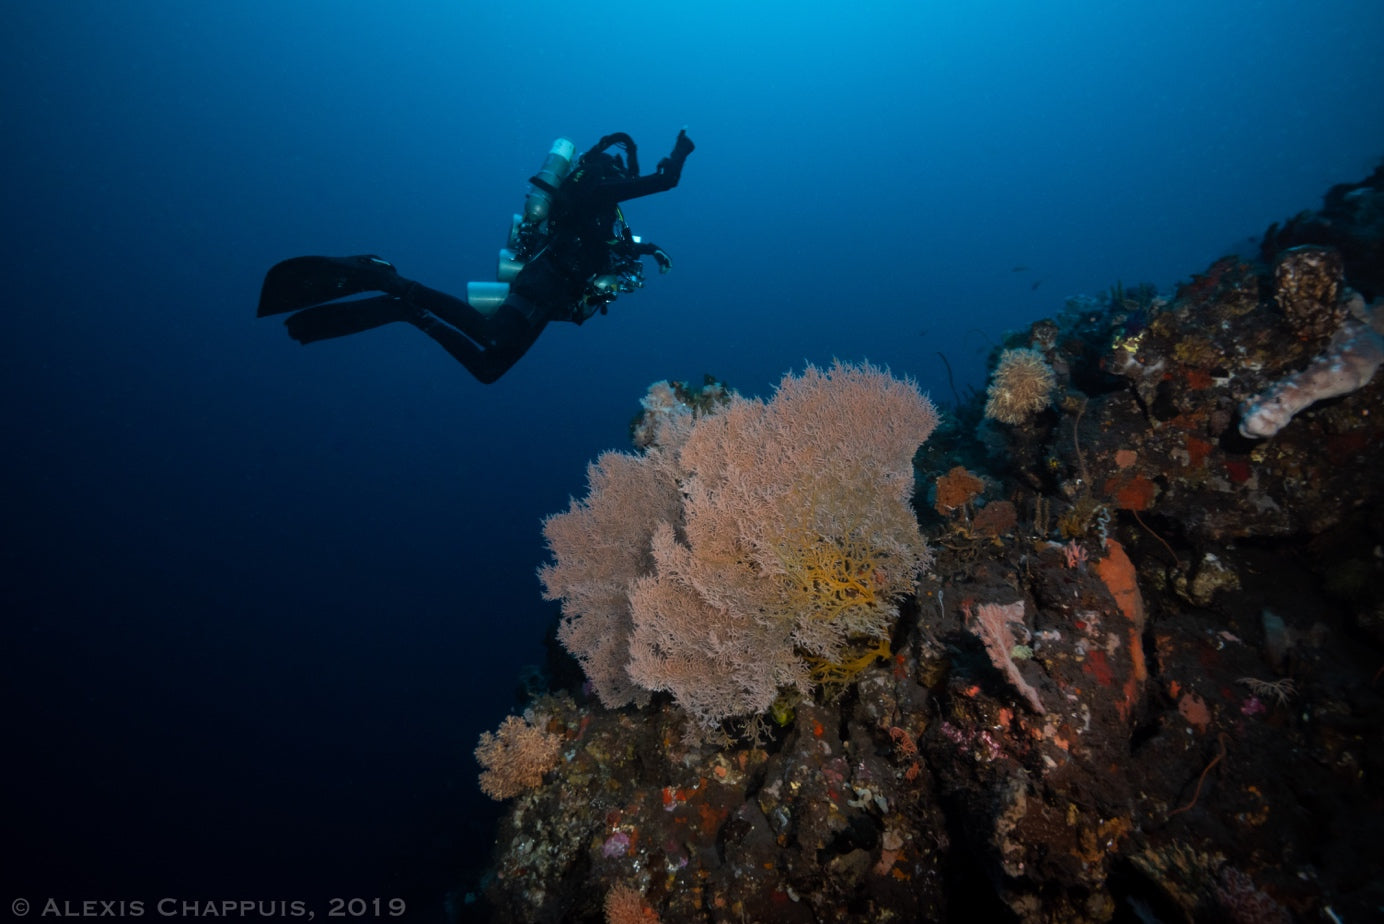 Mesophotic Coral Ecosystems in Indonesia